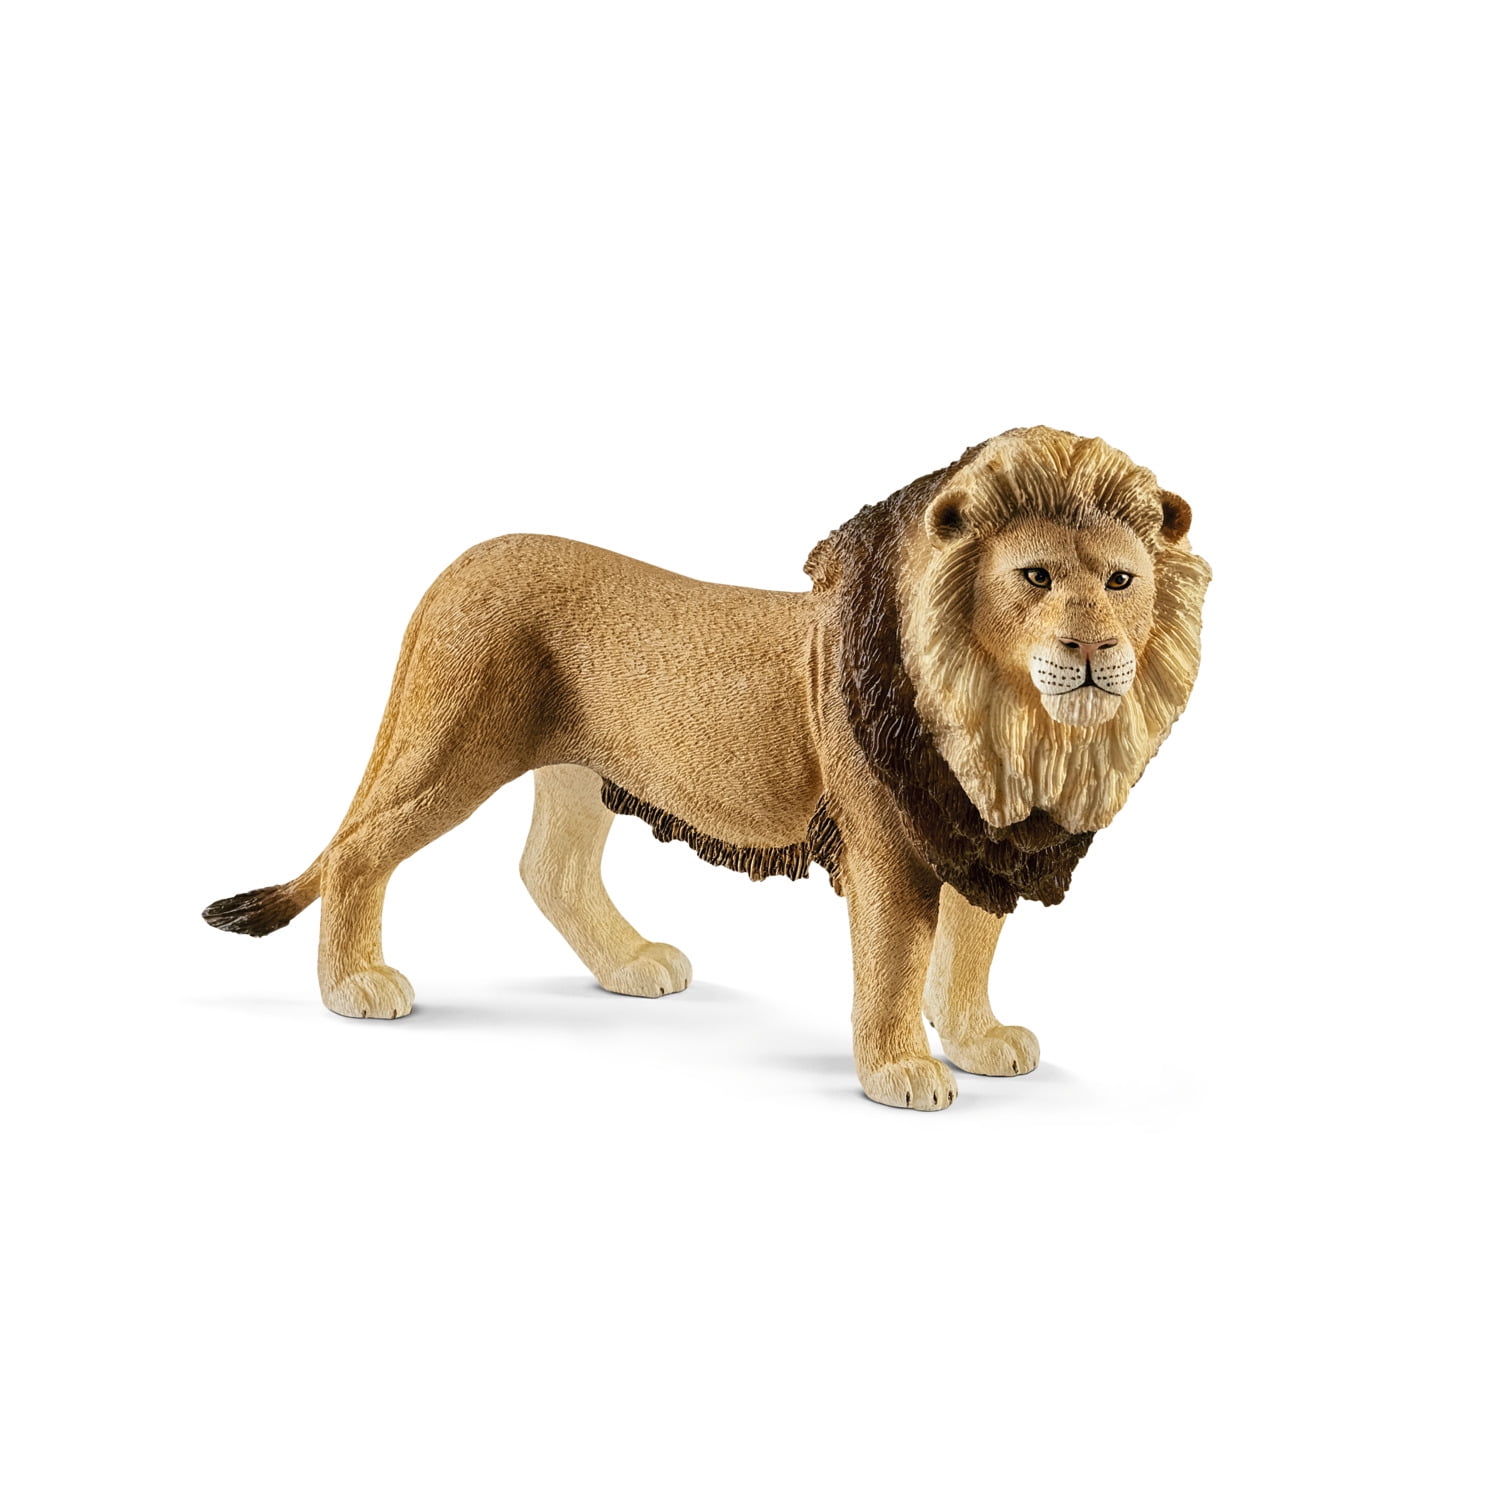 Papo LIONESS solid plastic toy wild zoo African animal cat predator lion NEW 